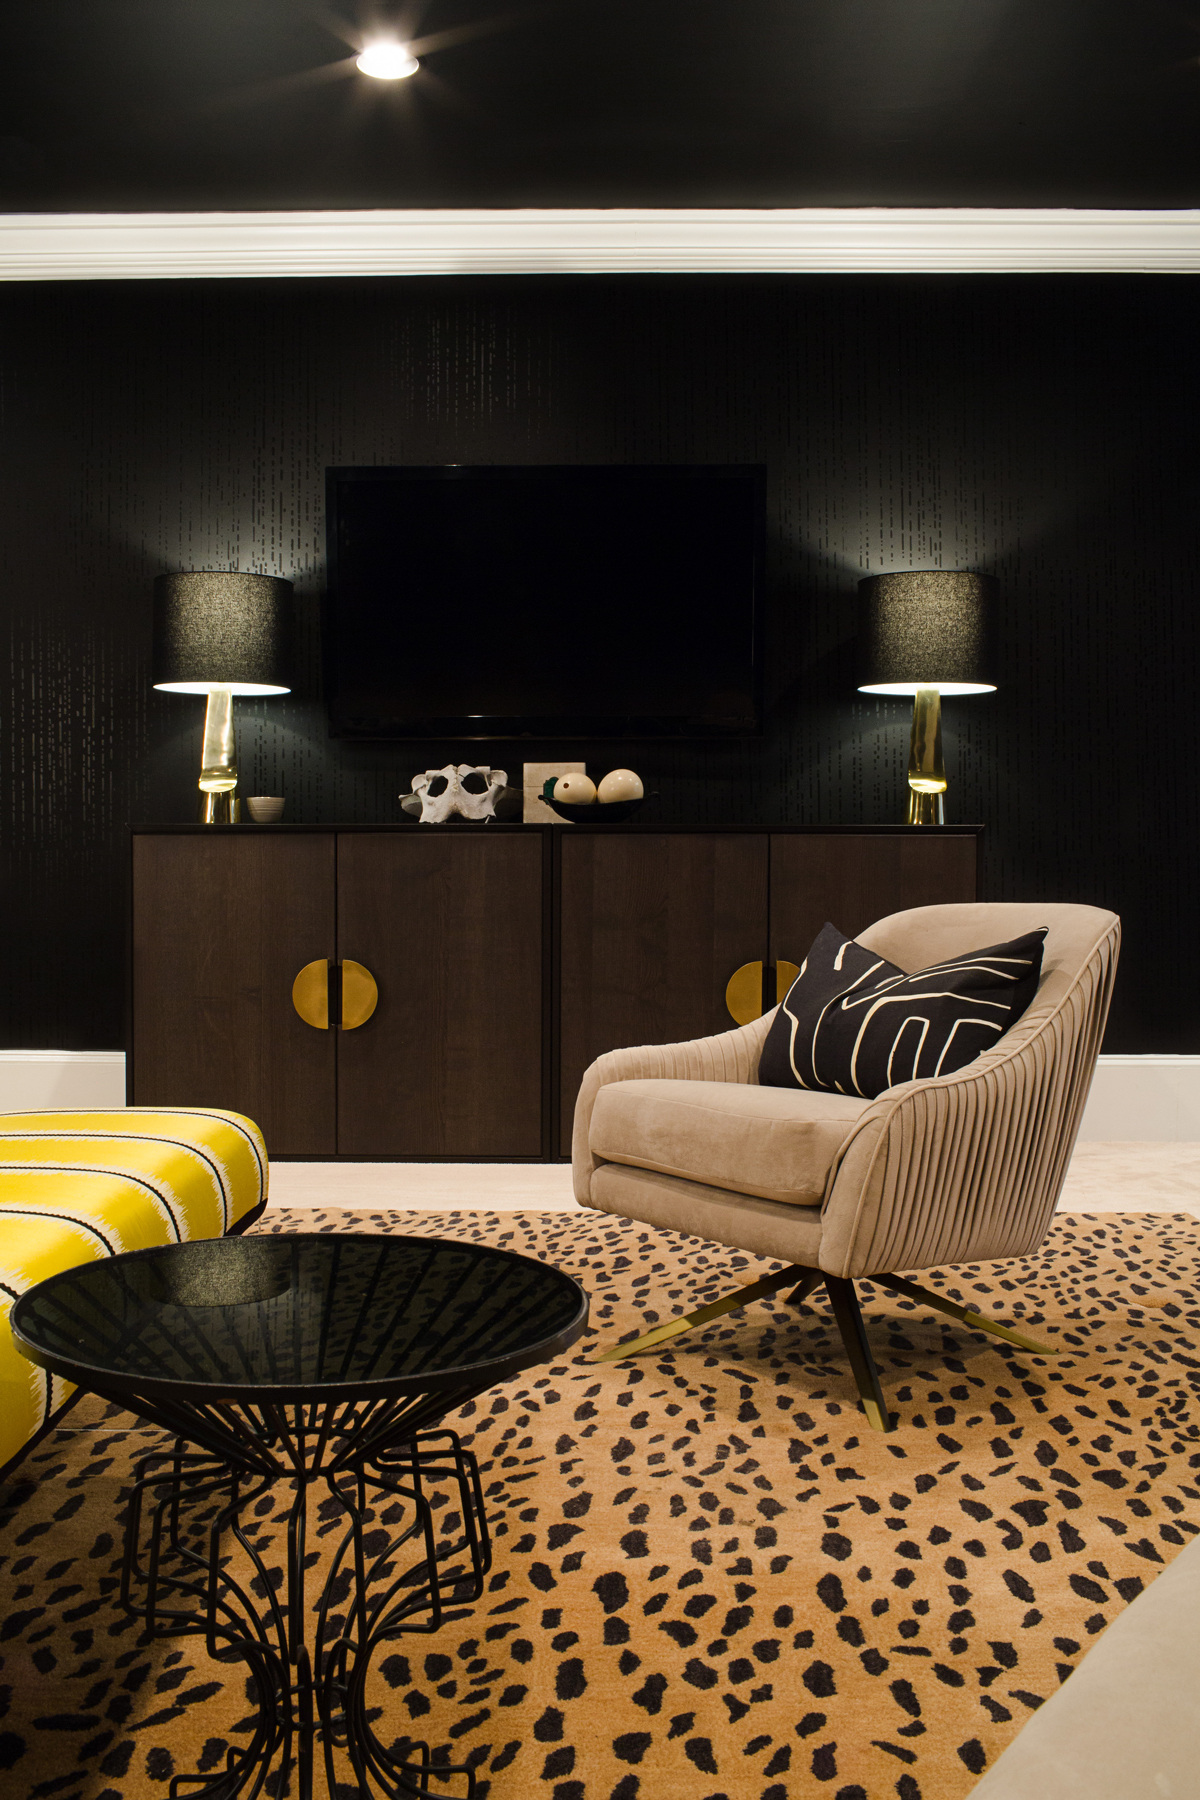 Sumptuous Suite NEST Magazine Forbes and Masters